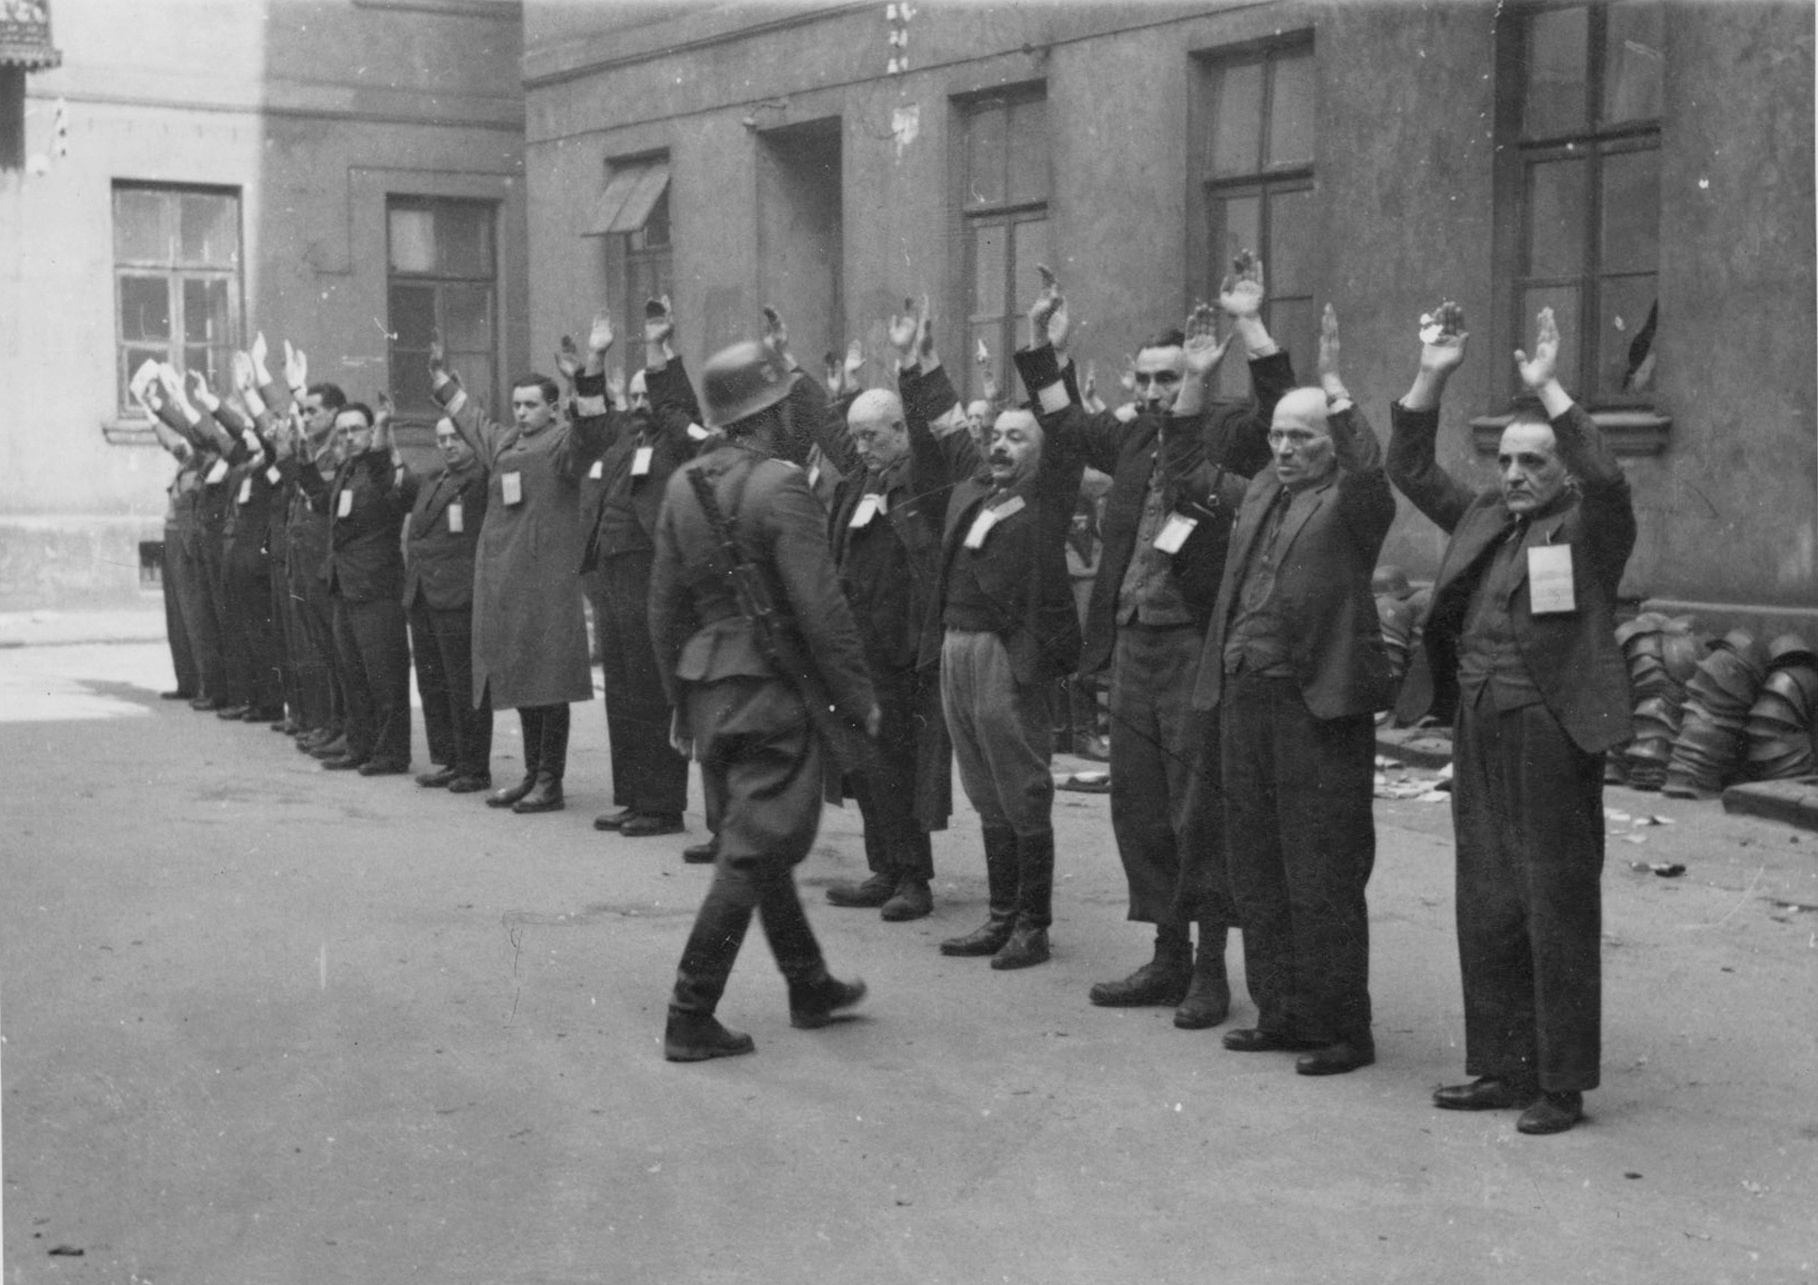 Arrested Jewish department heads of the Brauer helmet factory, Warsaw, Poland, shortly after 1700 hours on 24 Apr 1943, photo 1 of 2